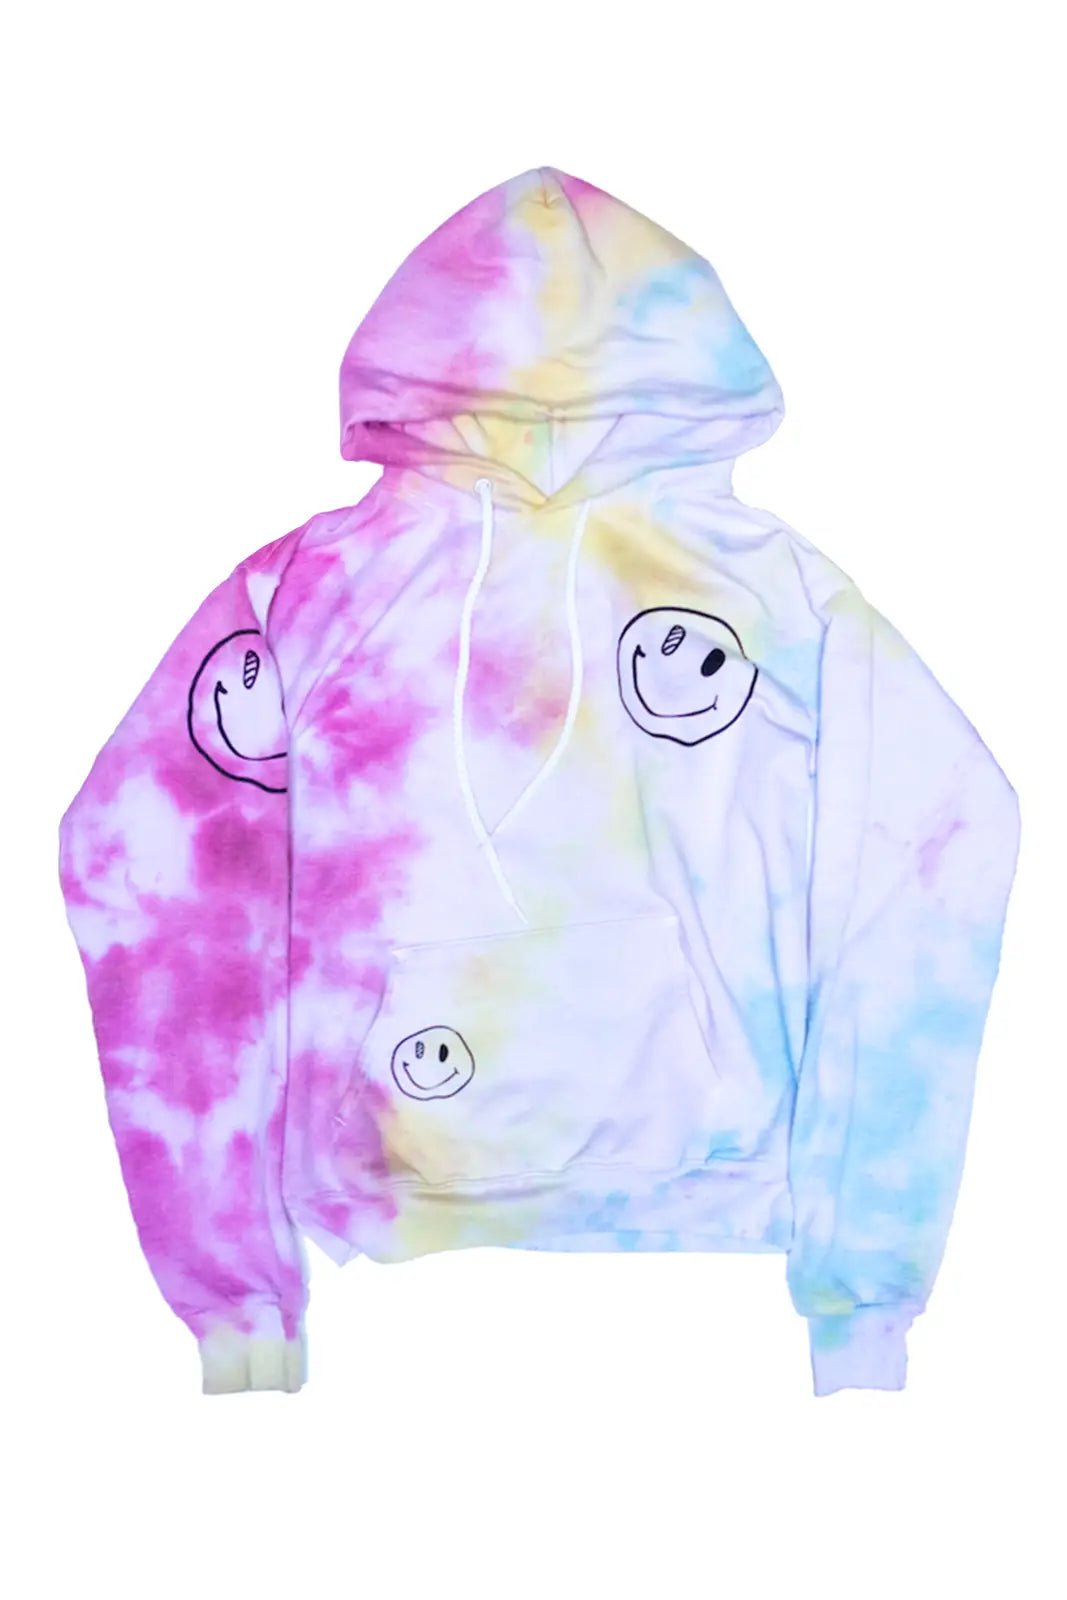 Rainbow Smiley Face Hoodie - Something about Sofia